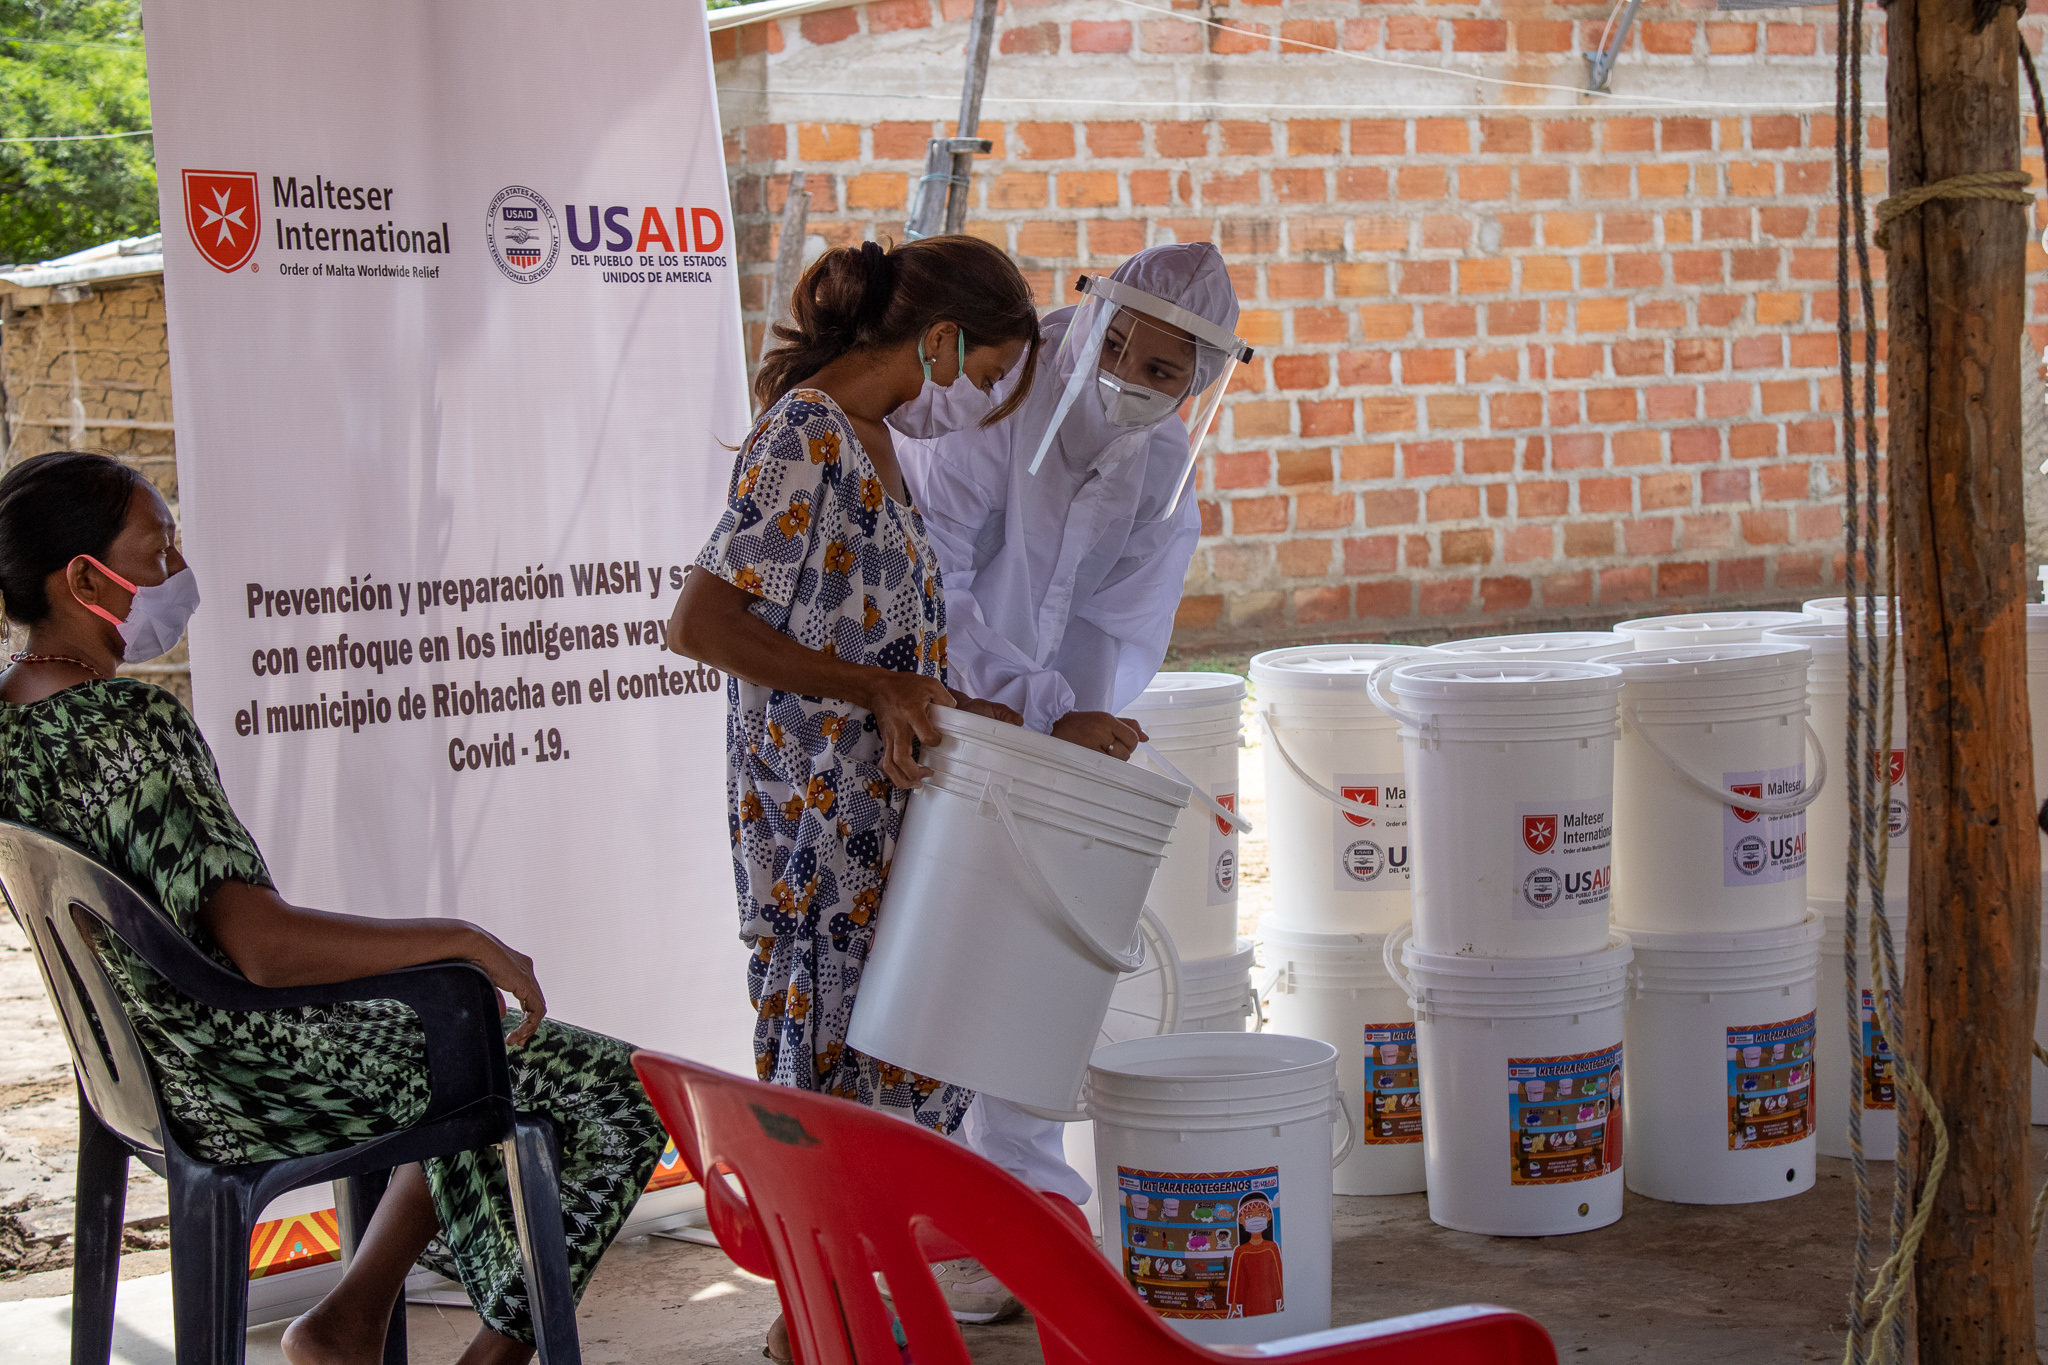 A series of photographs of the COVID-19 hygiene kits that were distributed to indigenous communities in La Guajira, Colombia.